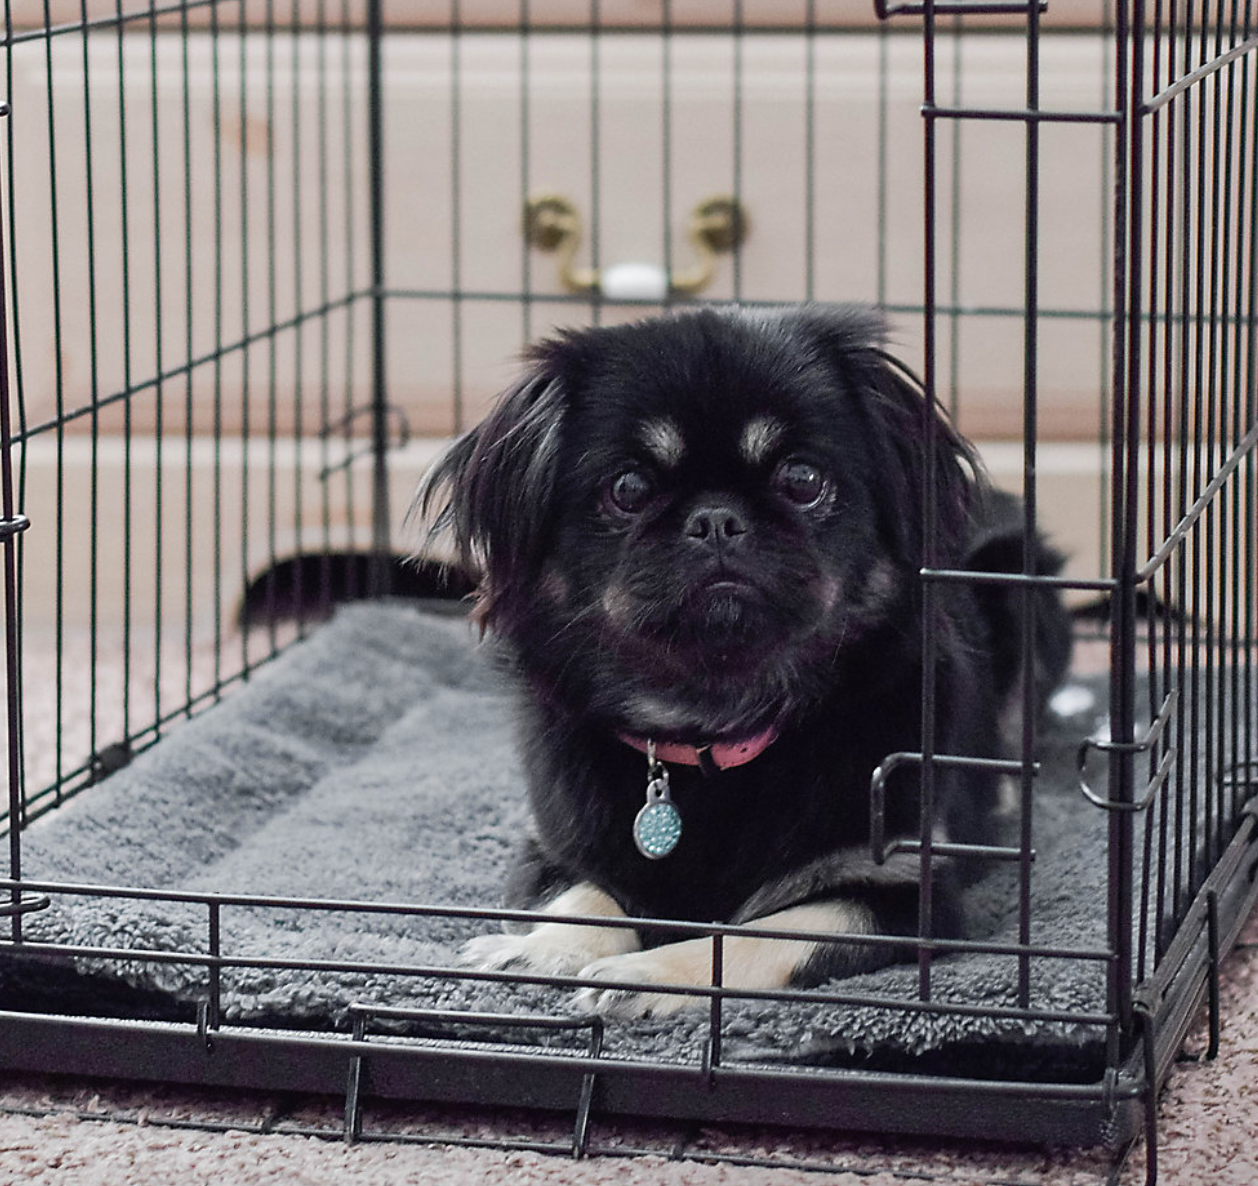 A dog sitting inside a crate on top of a grey self-warming mat